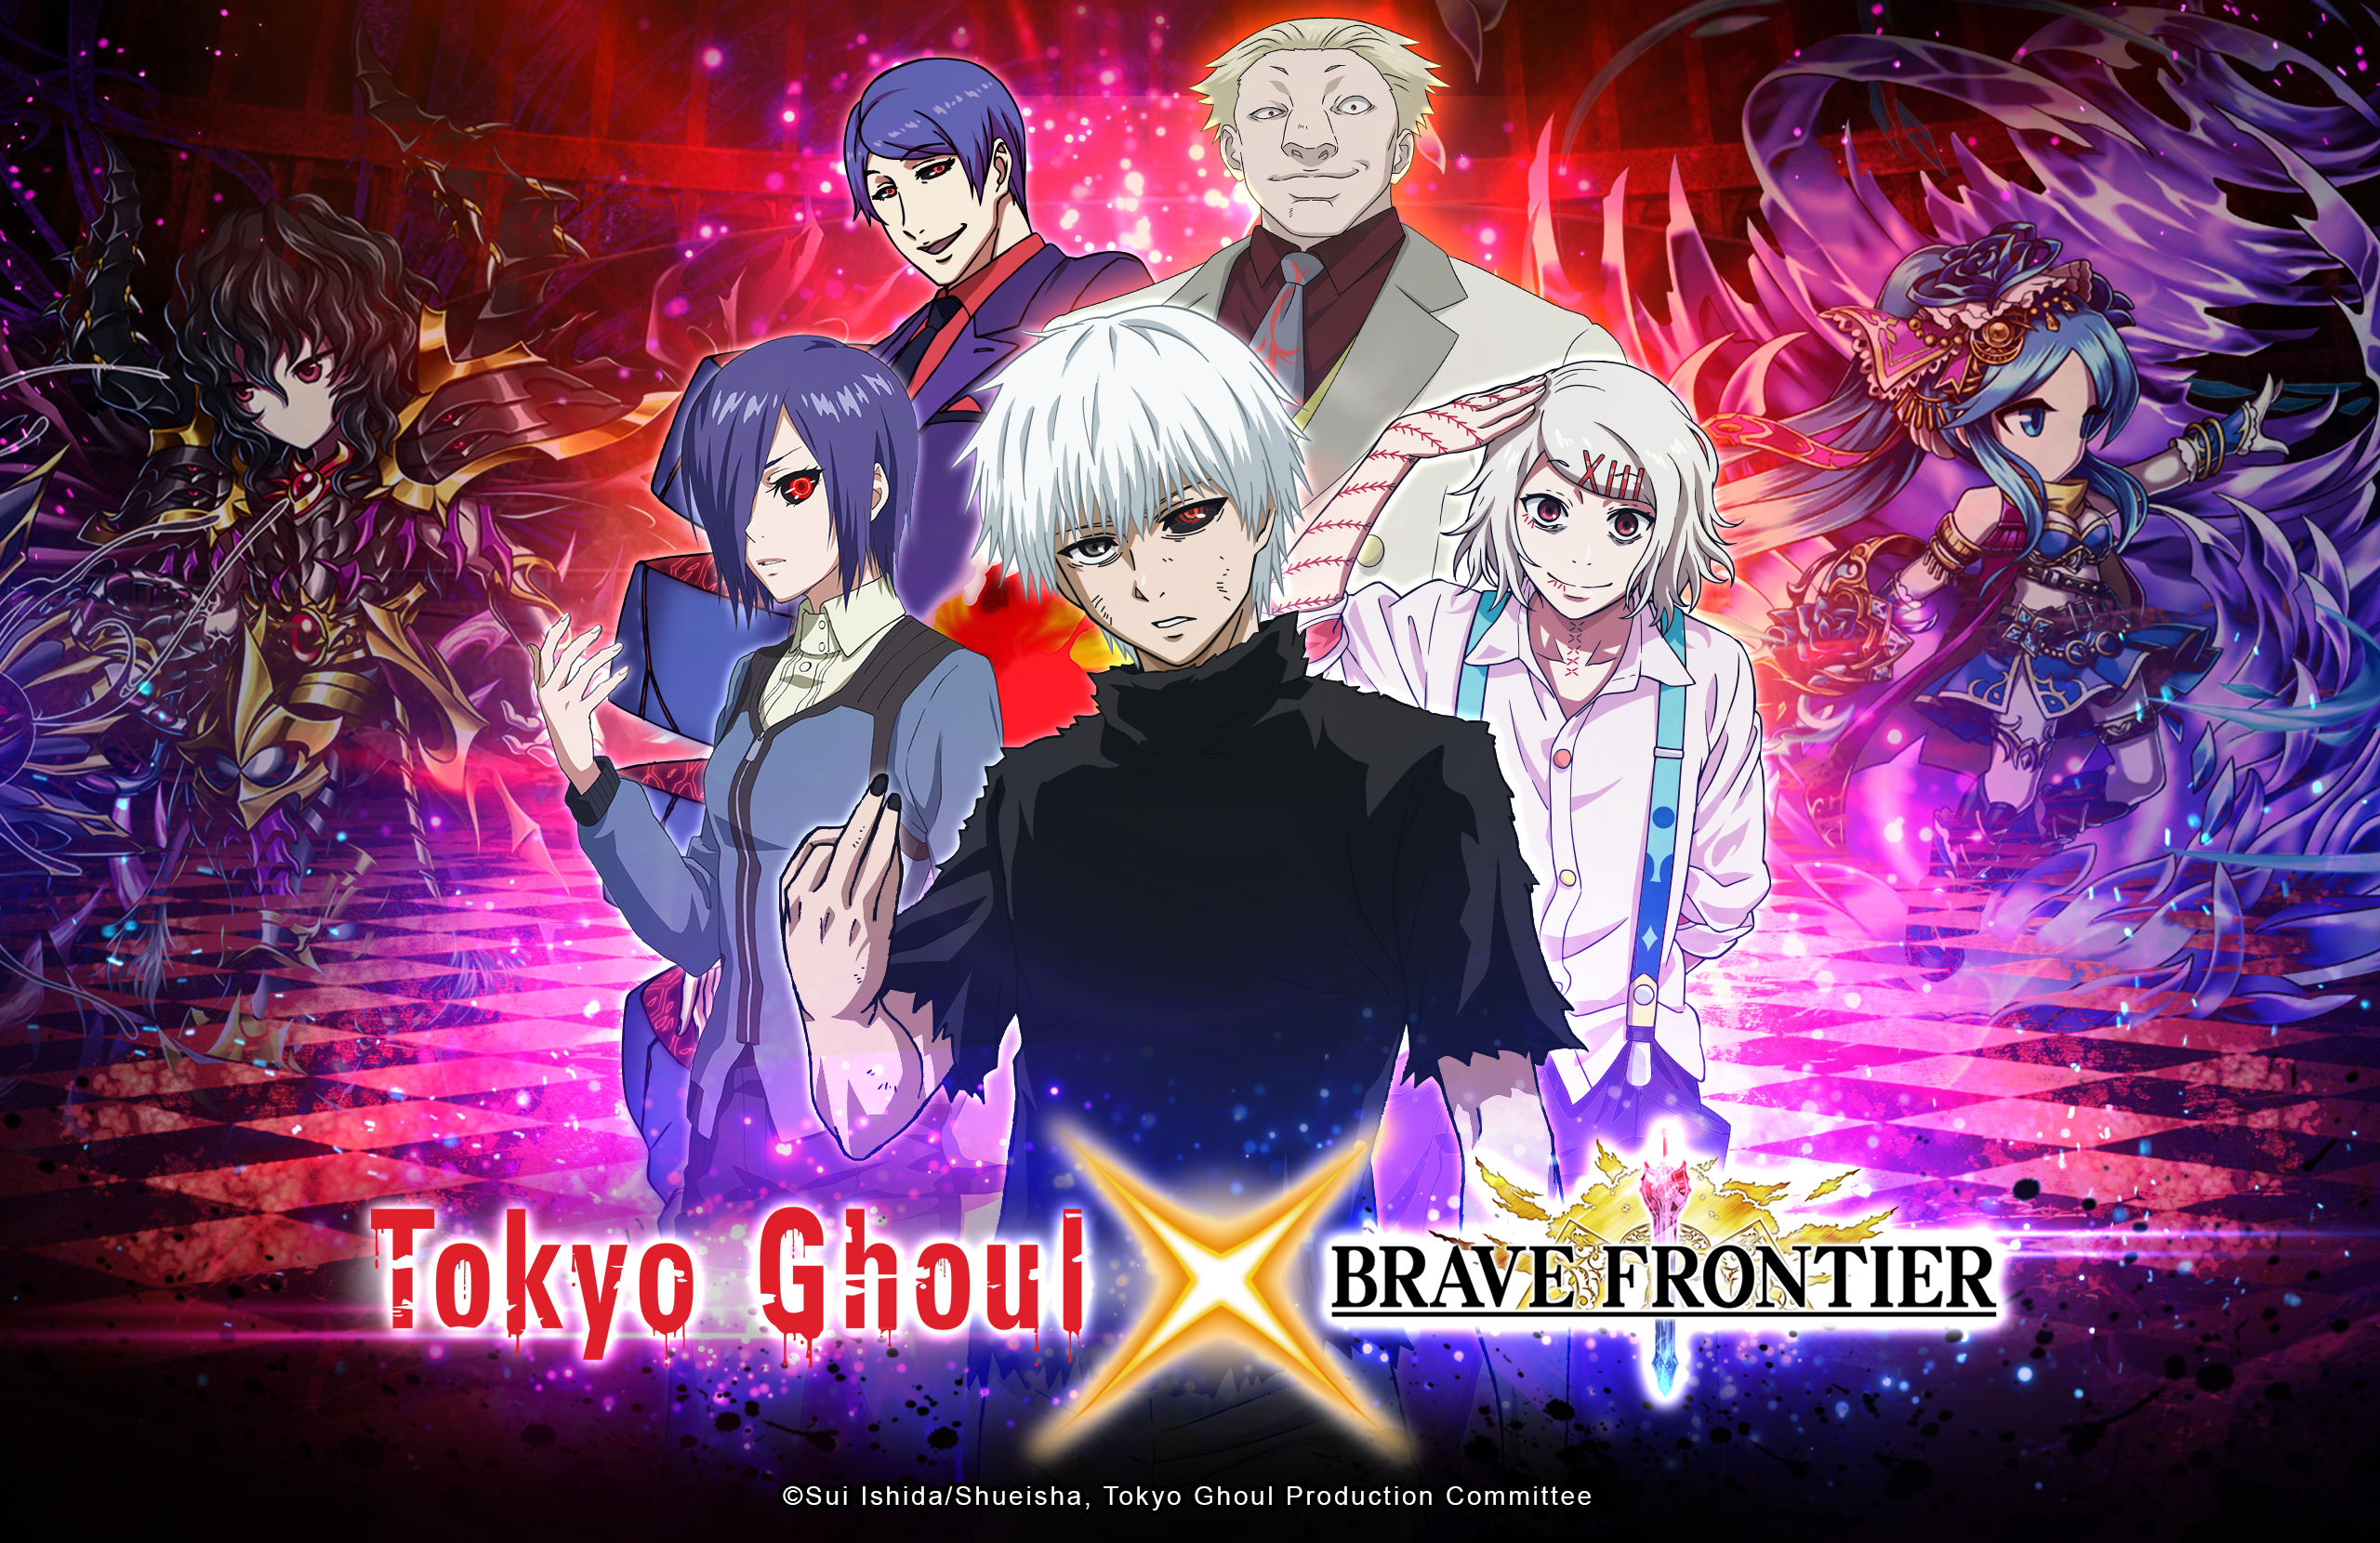 Brave Frontier X Tokyo Ghoul Collaboration Announced